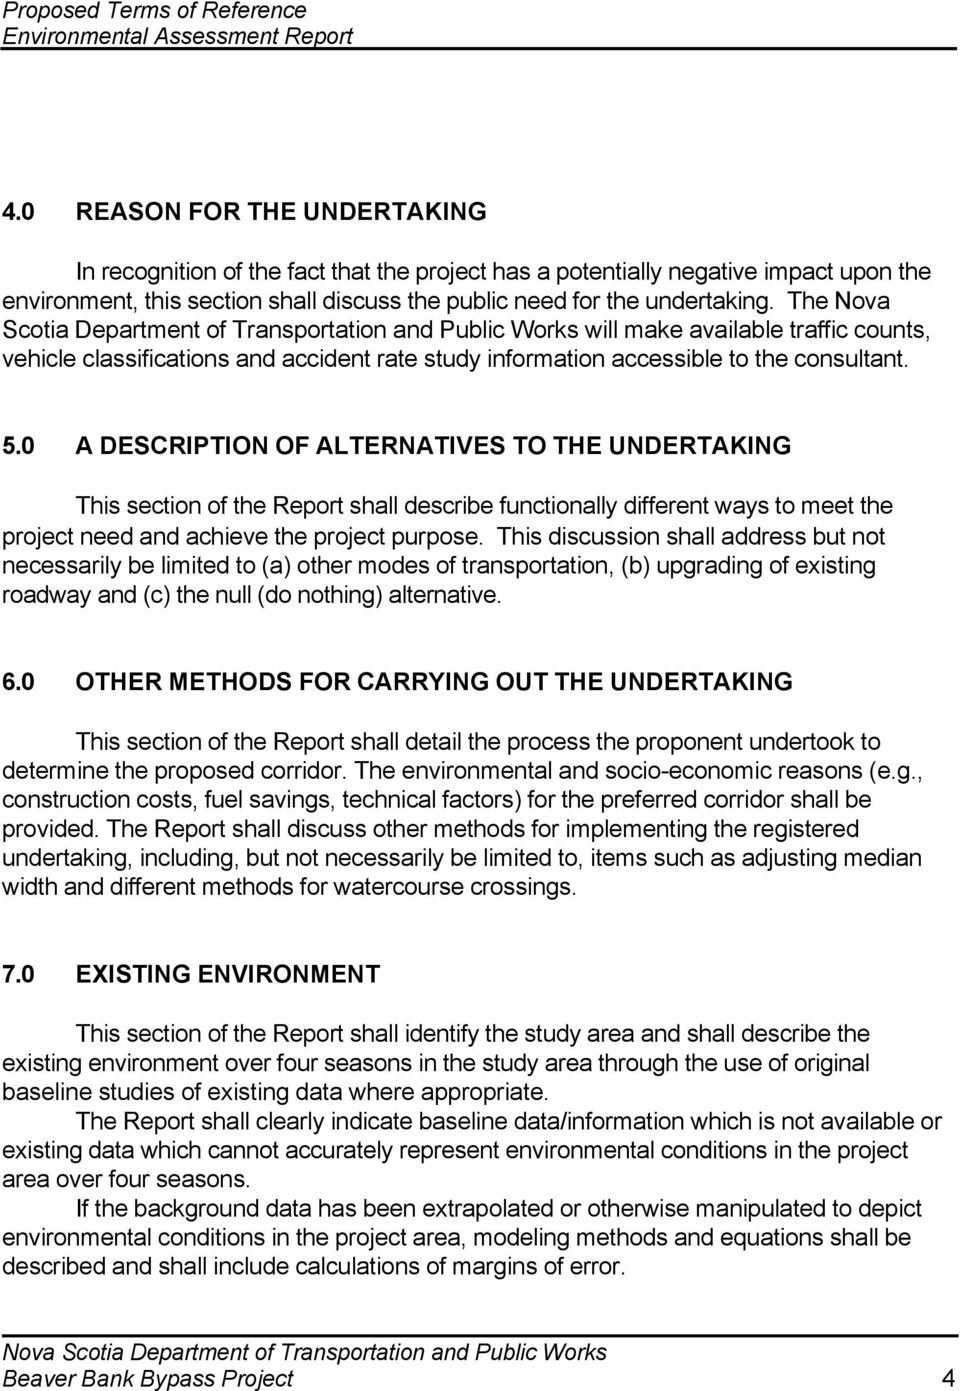 0 A DESCRIPTION OF ALTERNATIVES TO THE UNDERTAKING This section of the Report shall describe functionally different ways to meet the project need and achieve the project purpose.